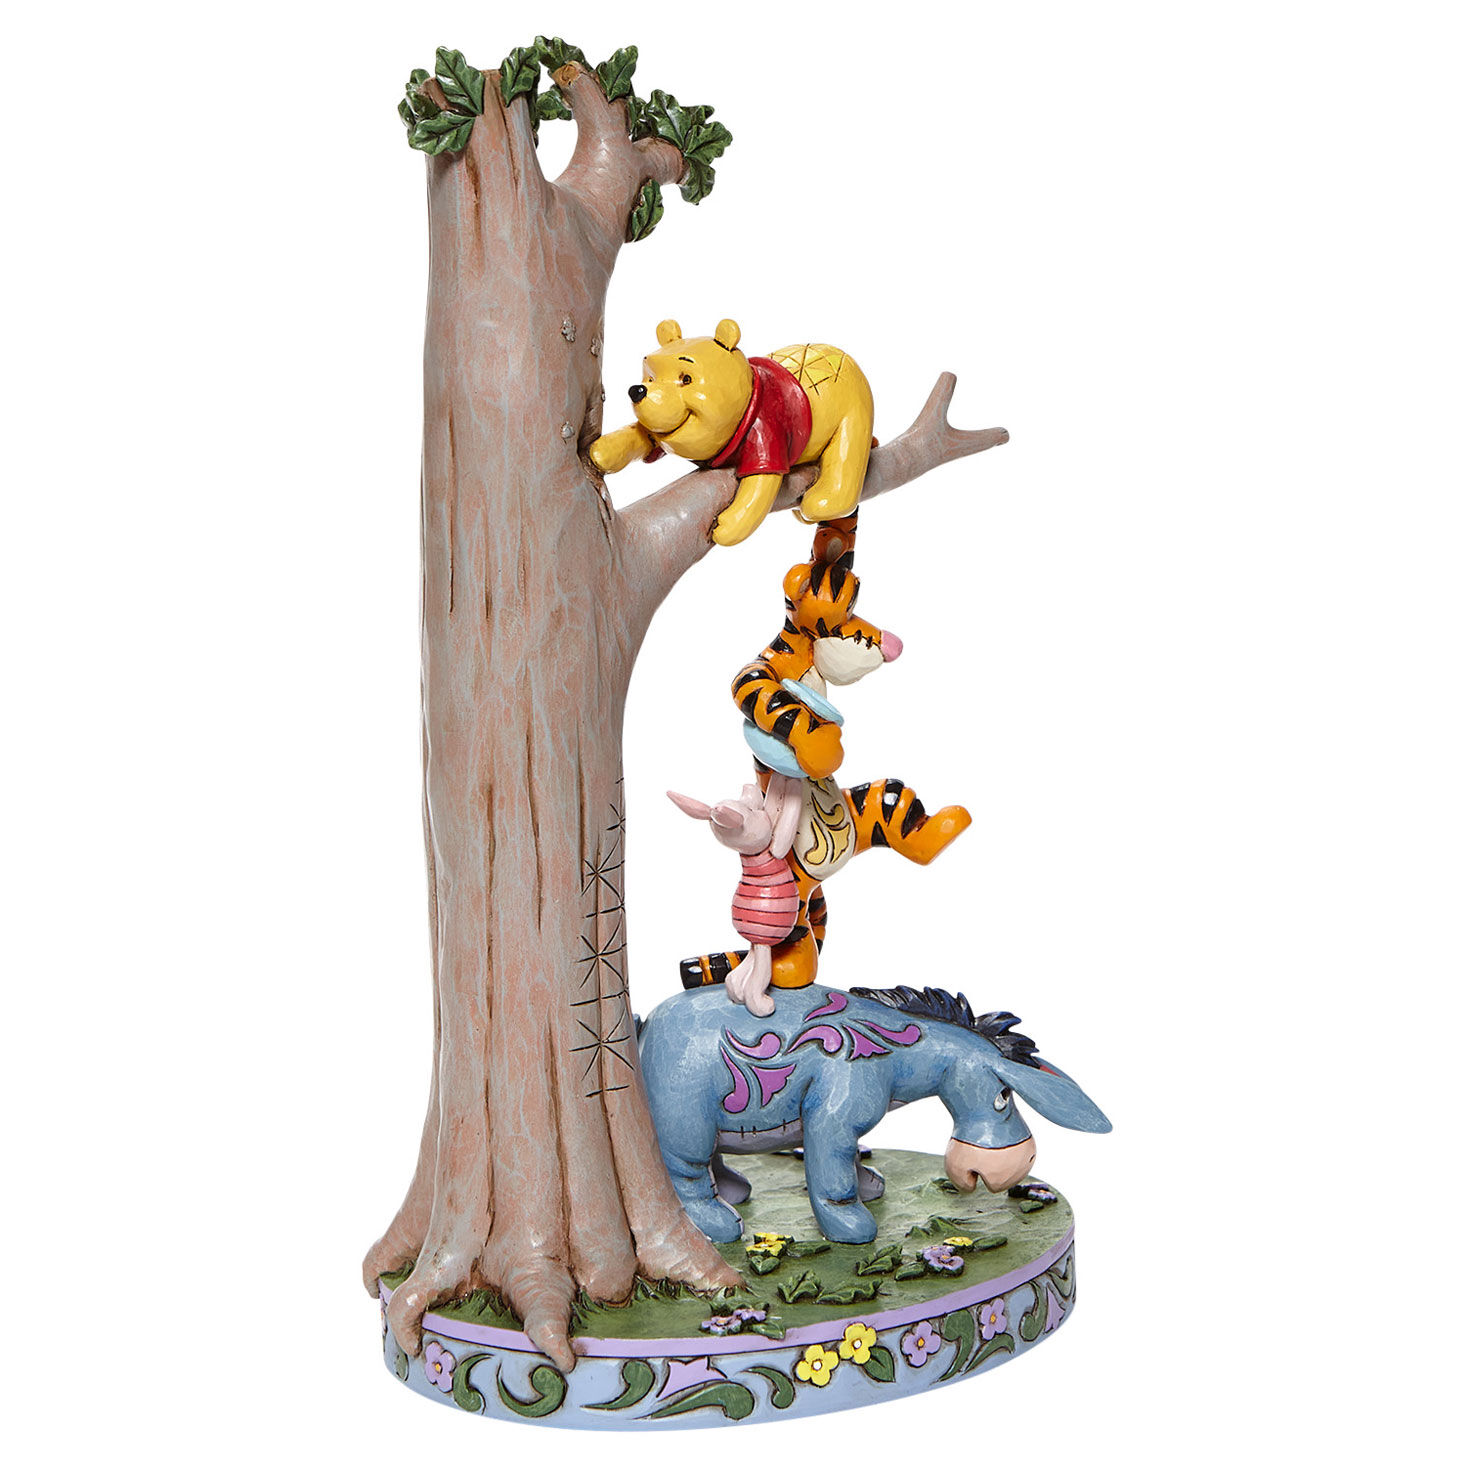 Jim Shore Disney Winnie the Pooh and Friends in Tree Figurine, 8.75" for only USD 89.99 | Hallmark